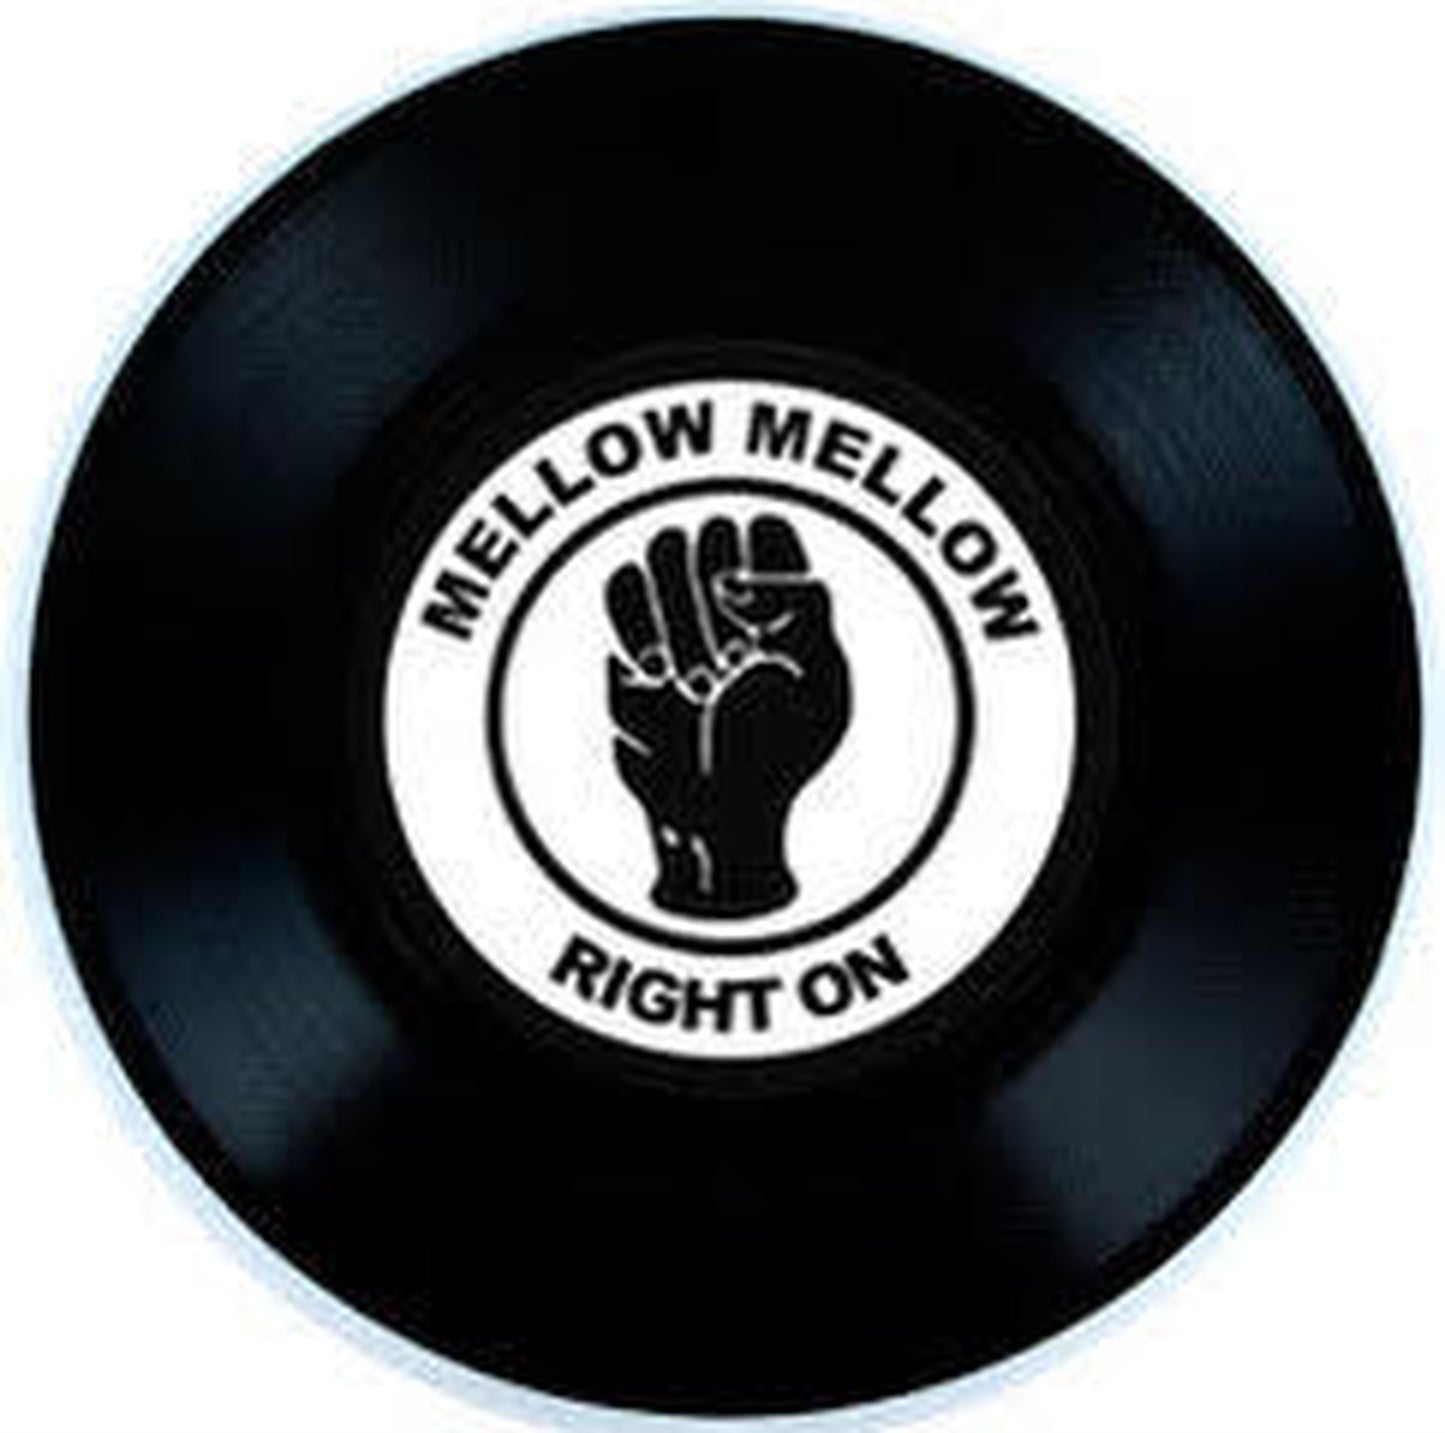 【7"】V.A. - Mellow Mellow Right On / The Only Way Is Up